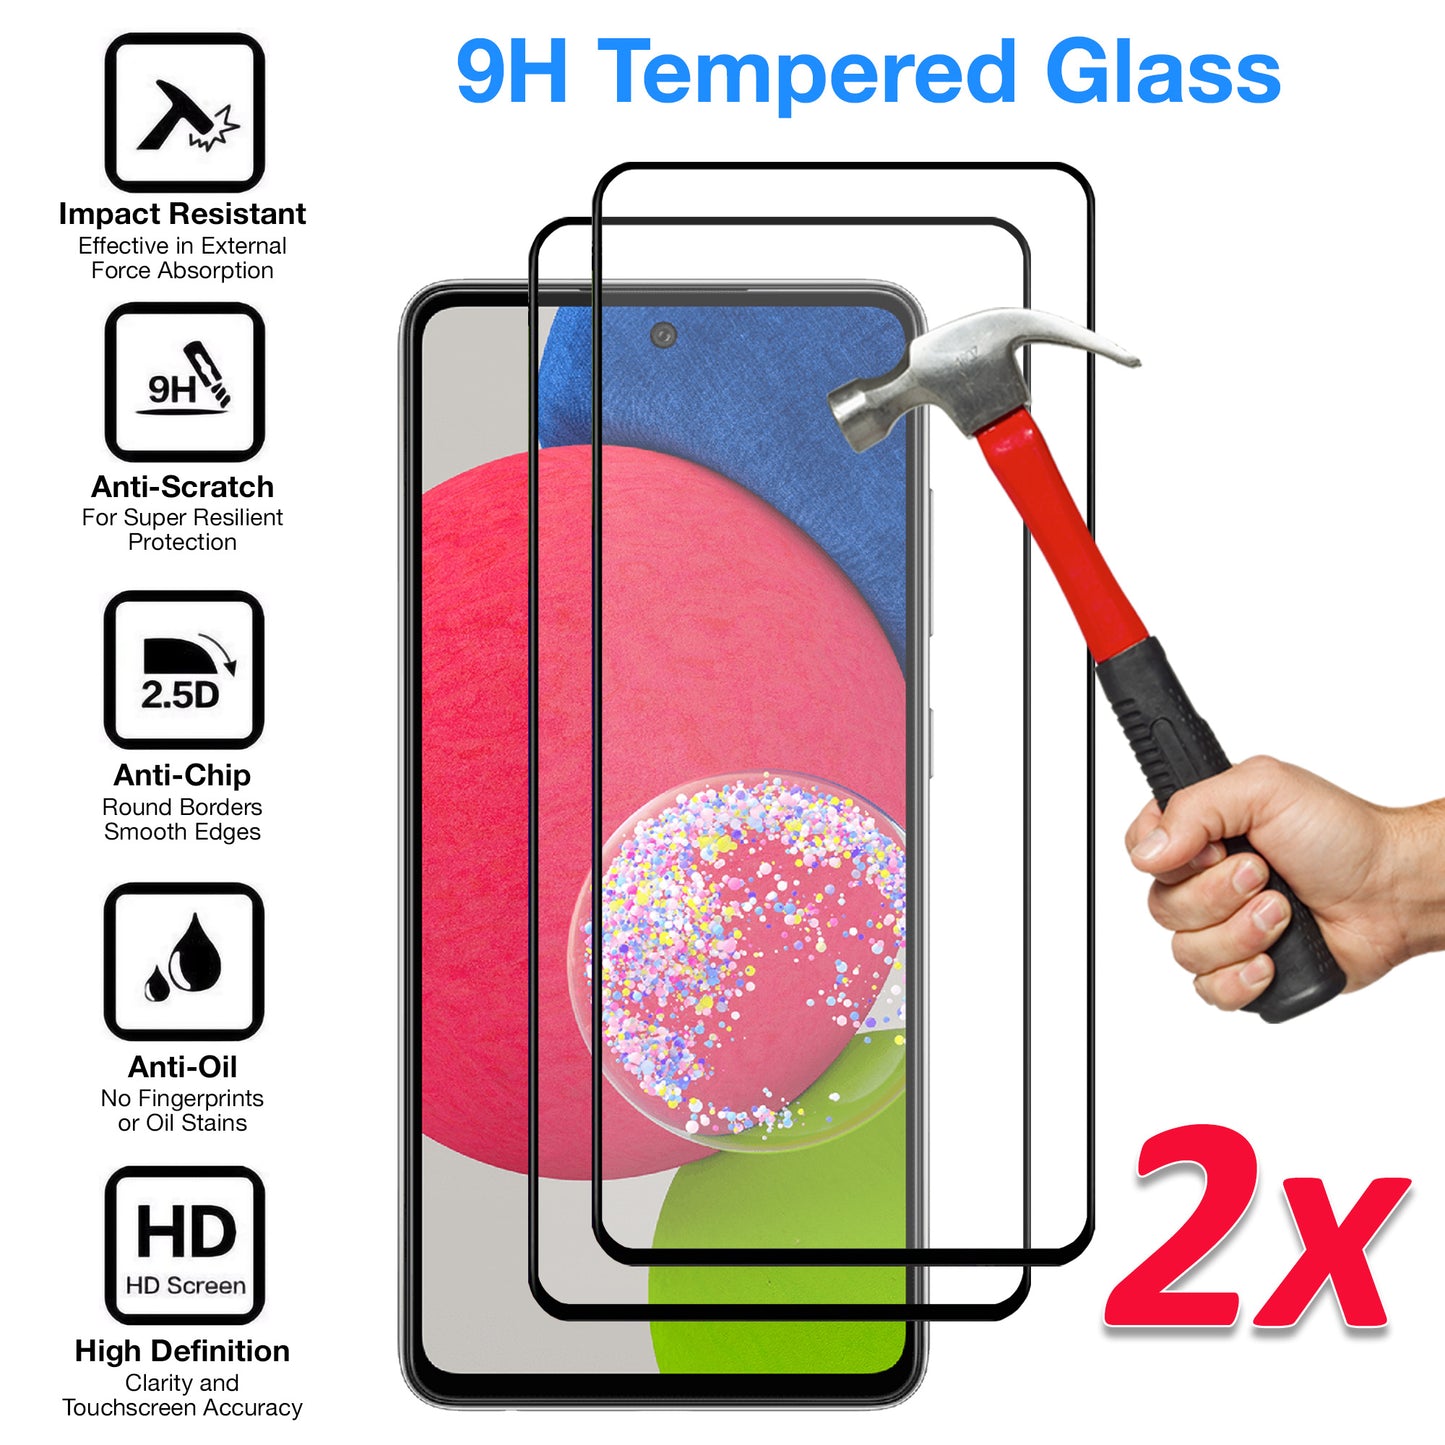 [2 Pack] MEZON Full Coverage Samsung Galaxy A52s 5G Tempered Glass Crystal Clear Premium 9H Screen Protector (A52s 5G, 9H Full)